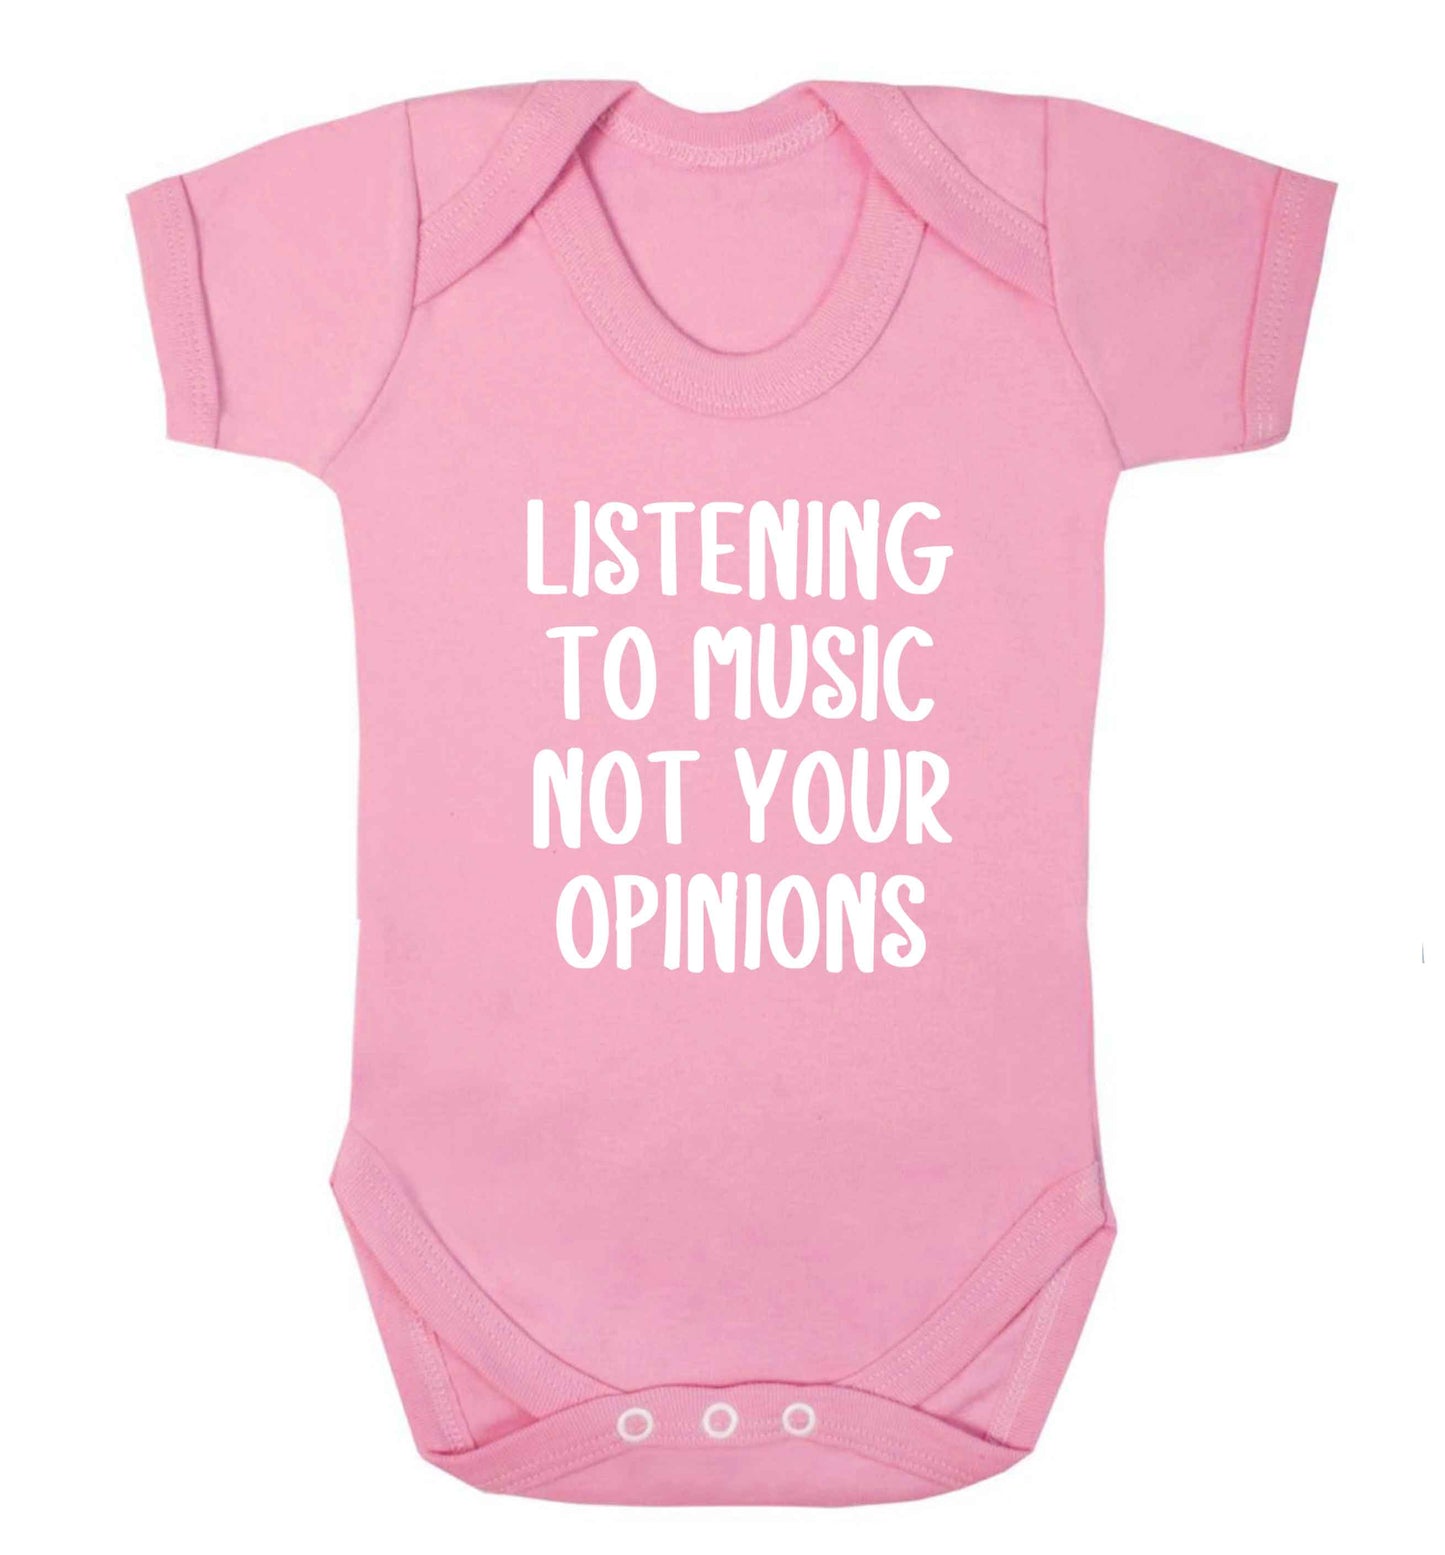 Listening to music not your opinions baby vest pale pink 18-24 months